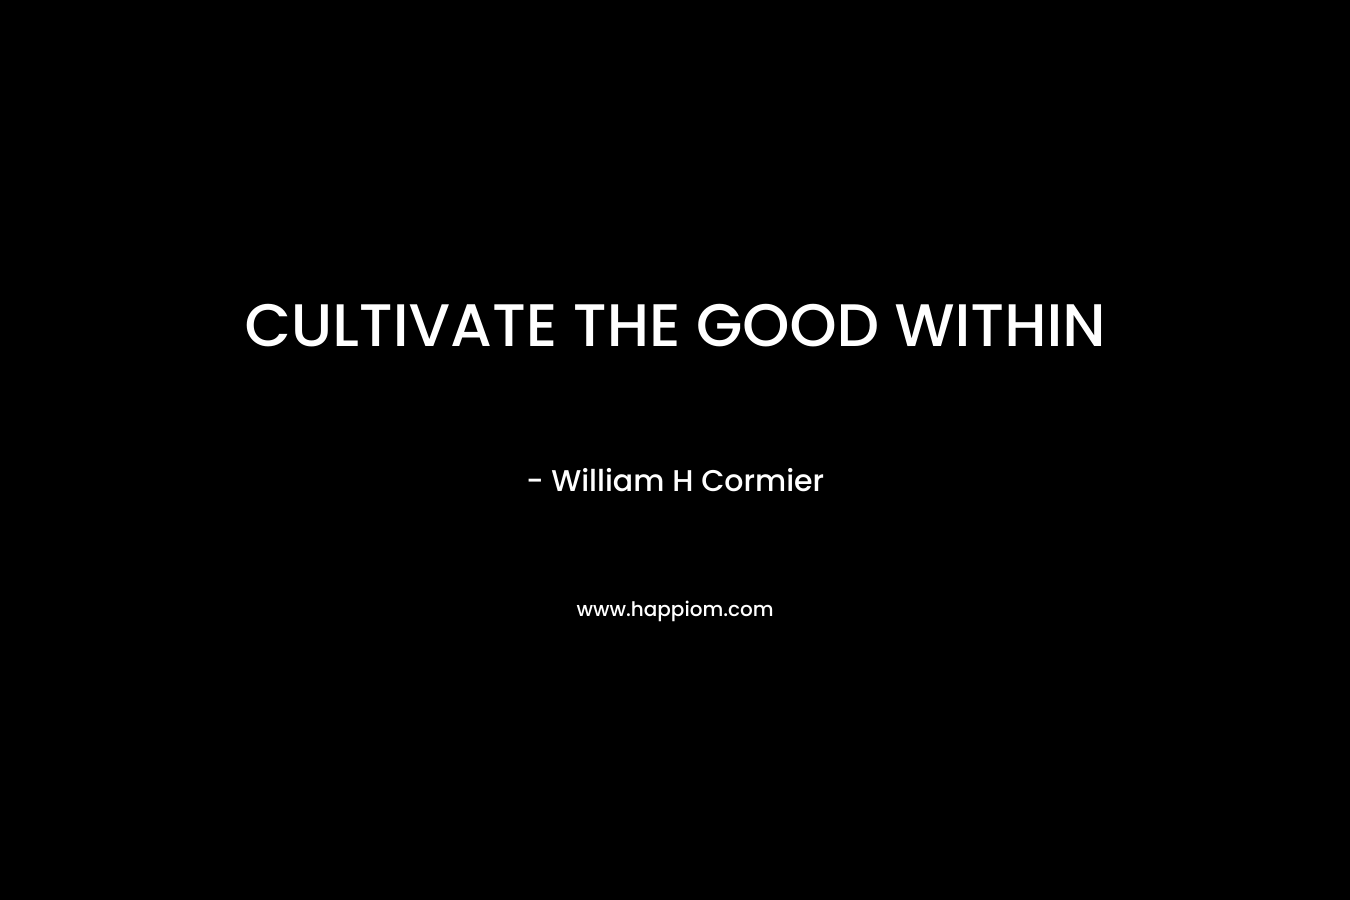 CULTIVATE THE GOOD WITHIN